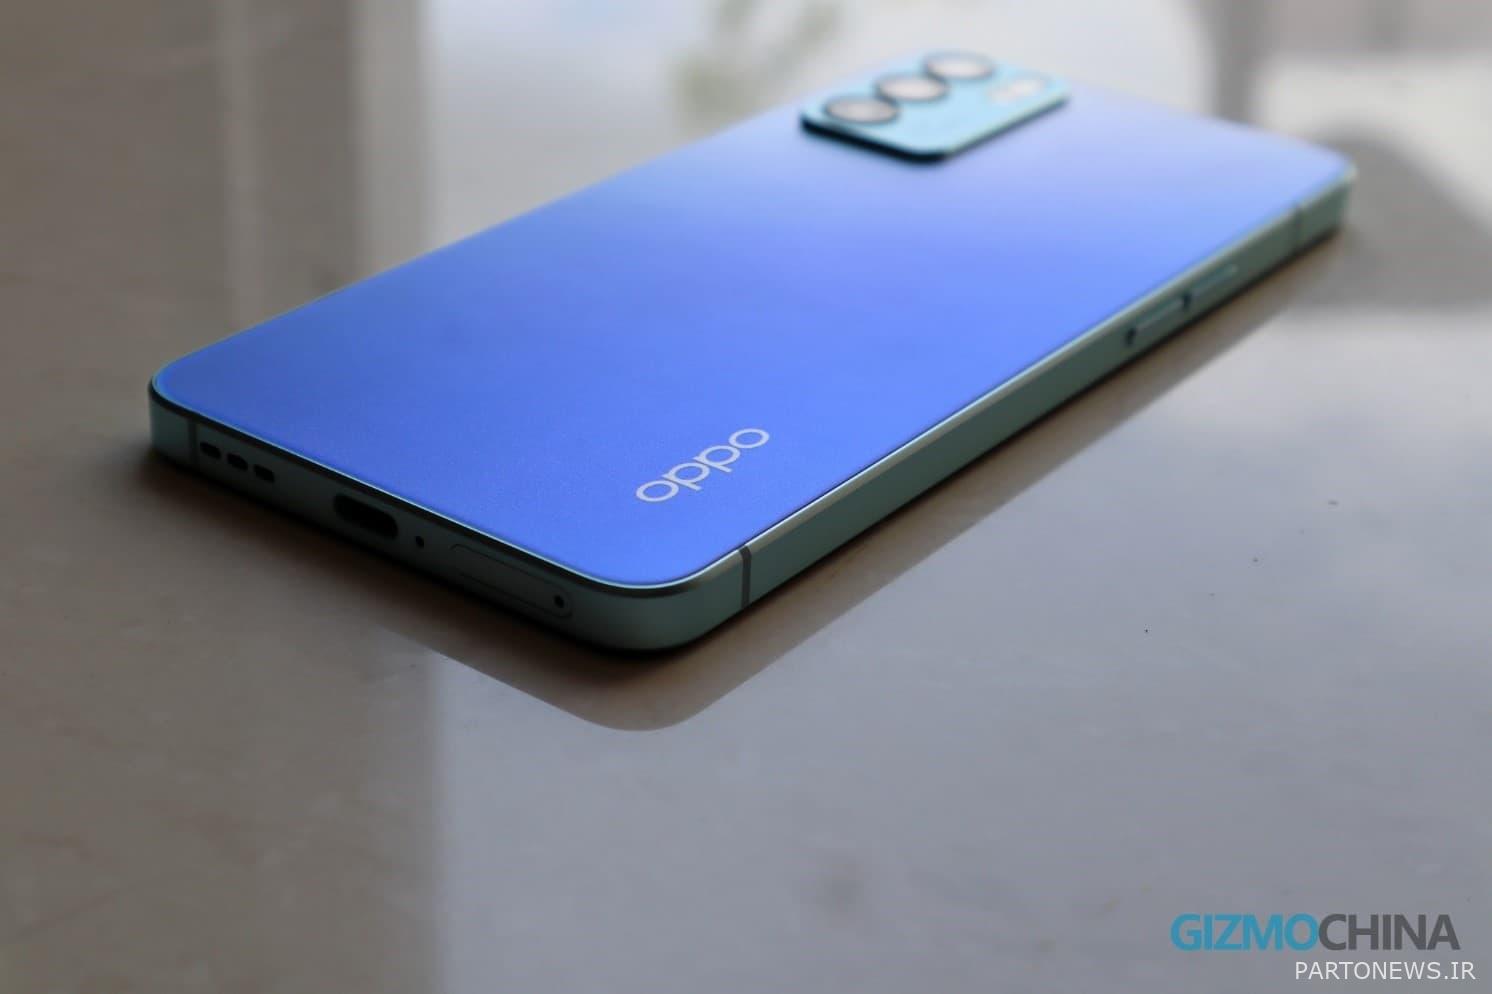 The back panel of the Oppo foldable smartphone with the code name Peacock Blue - Chicago